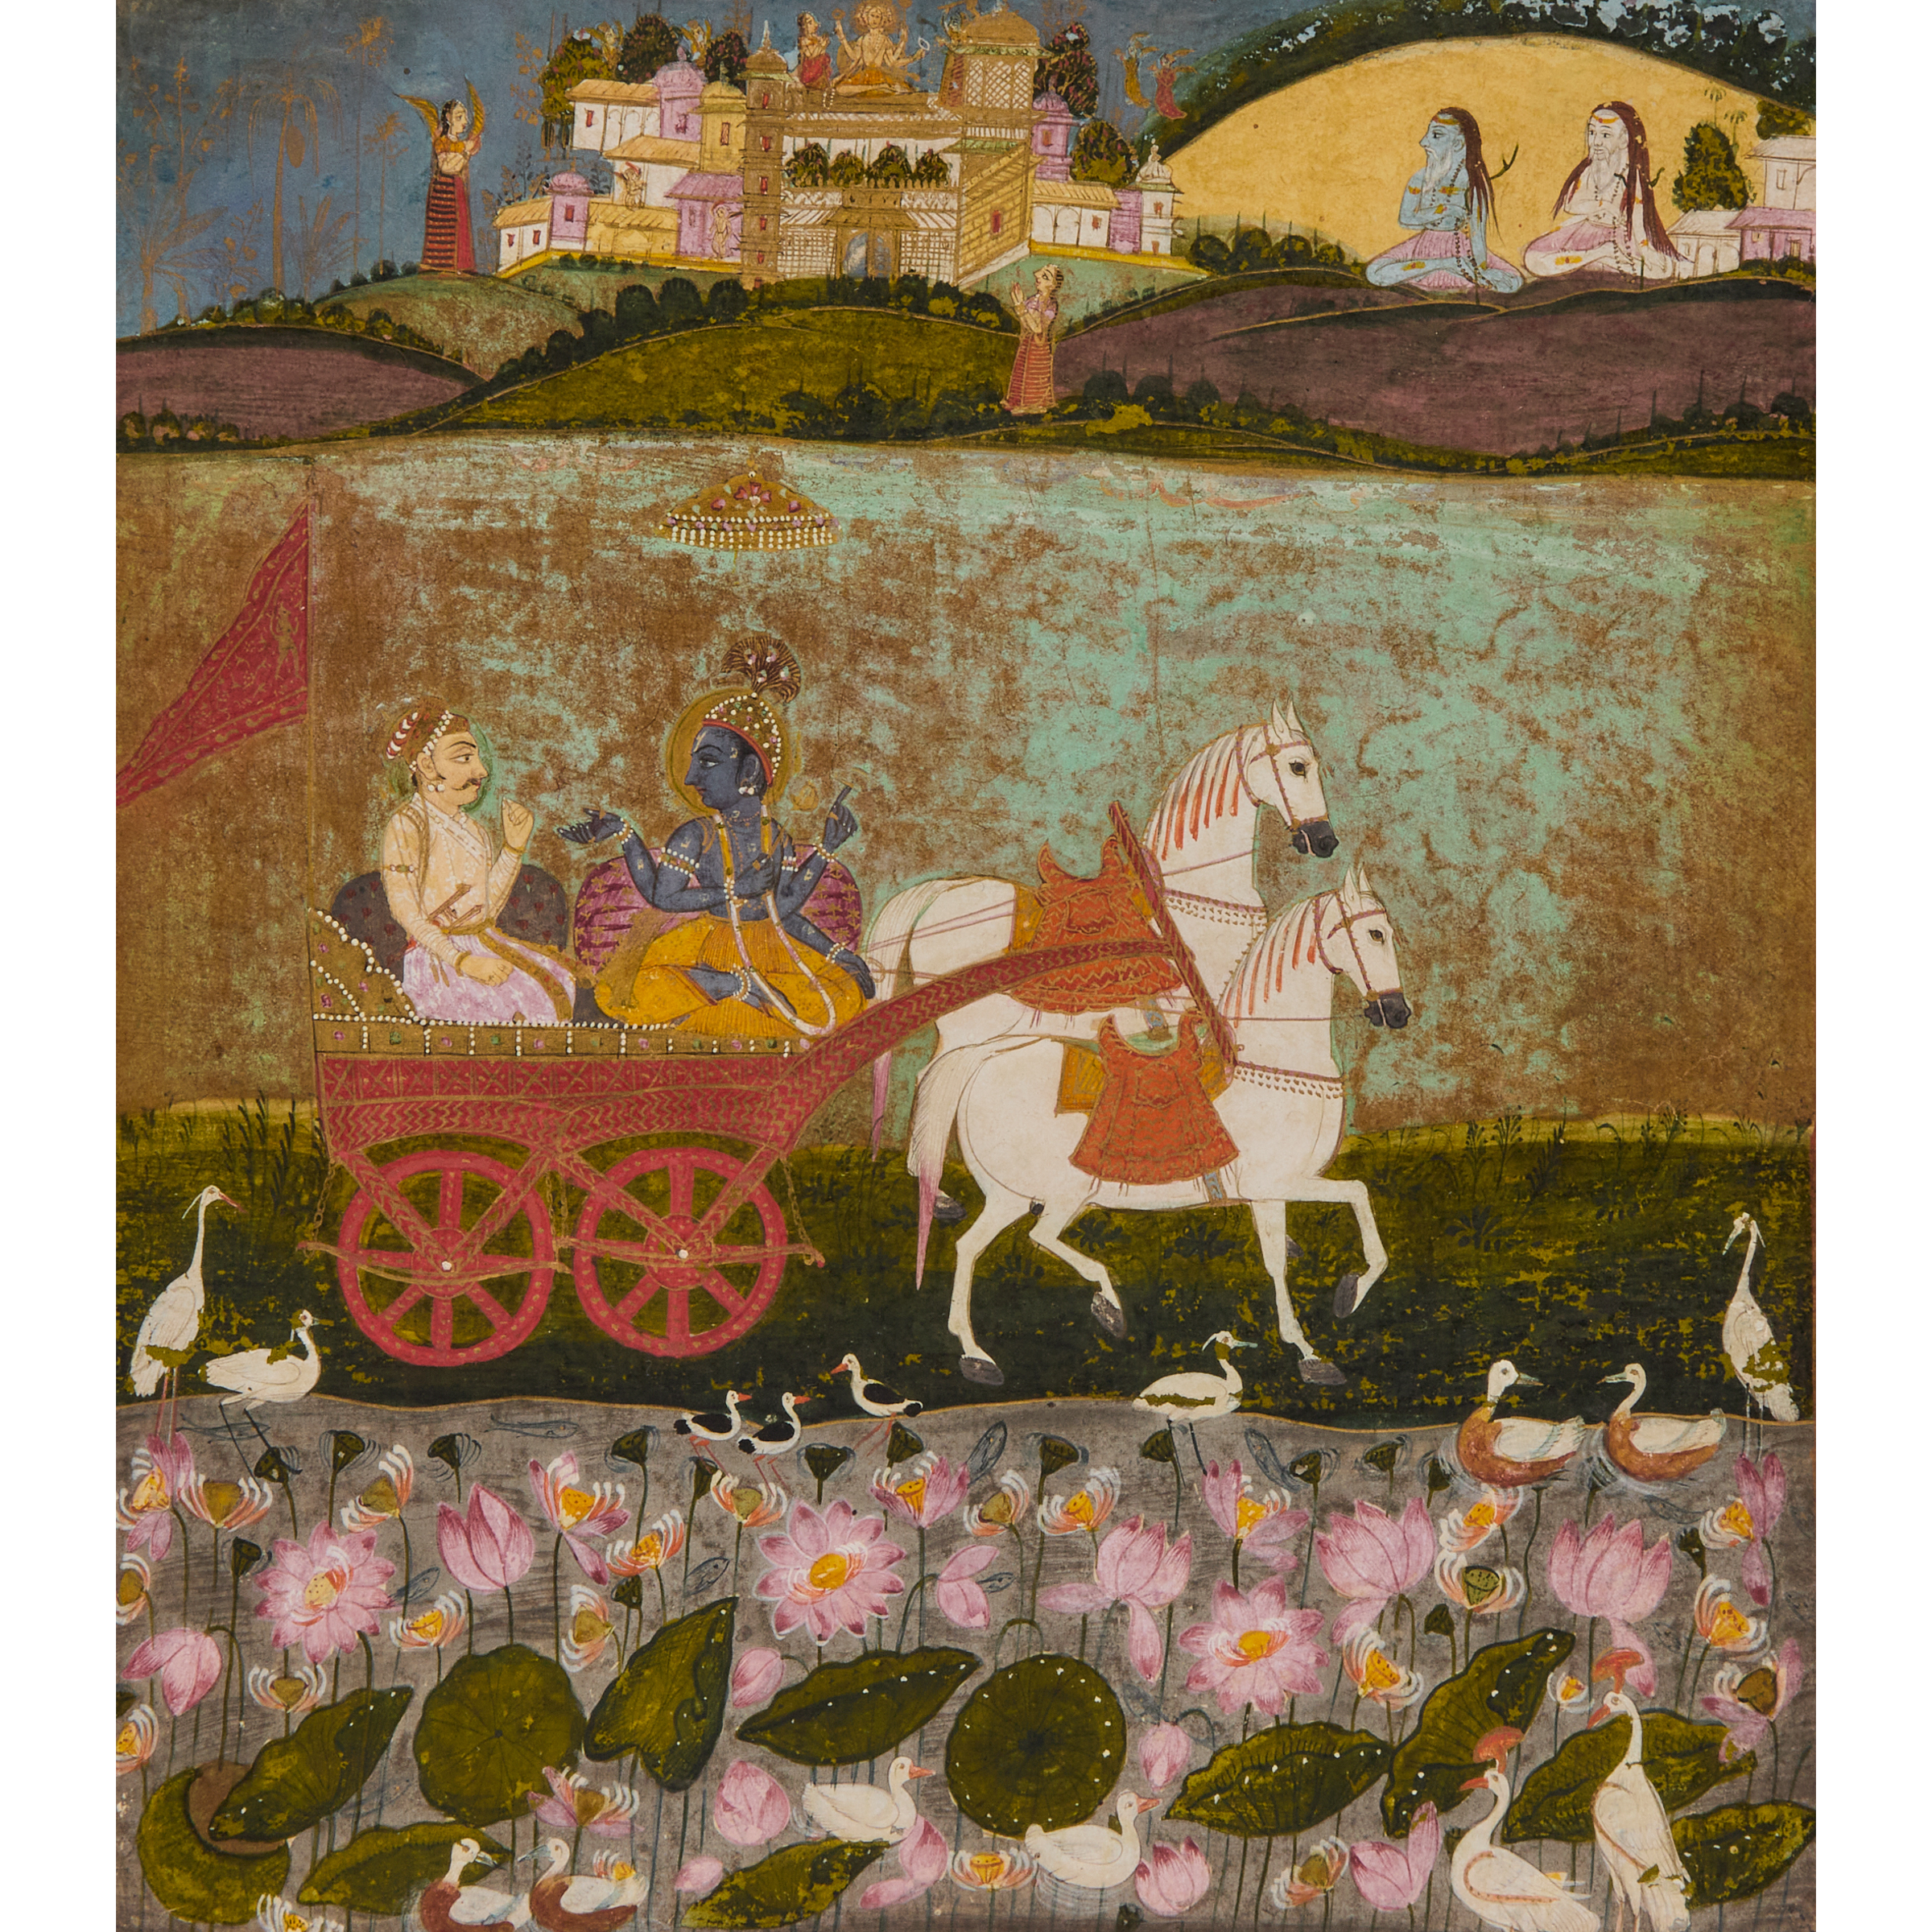 A Painting of Krishna and Arjuna Riding